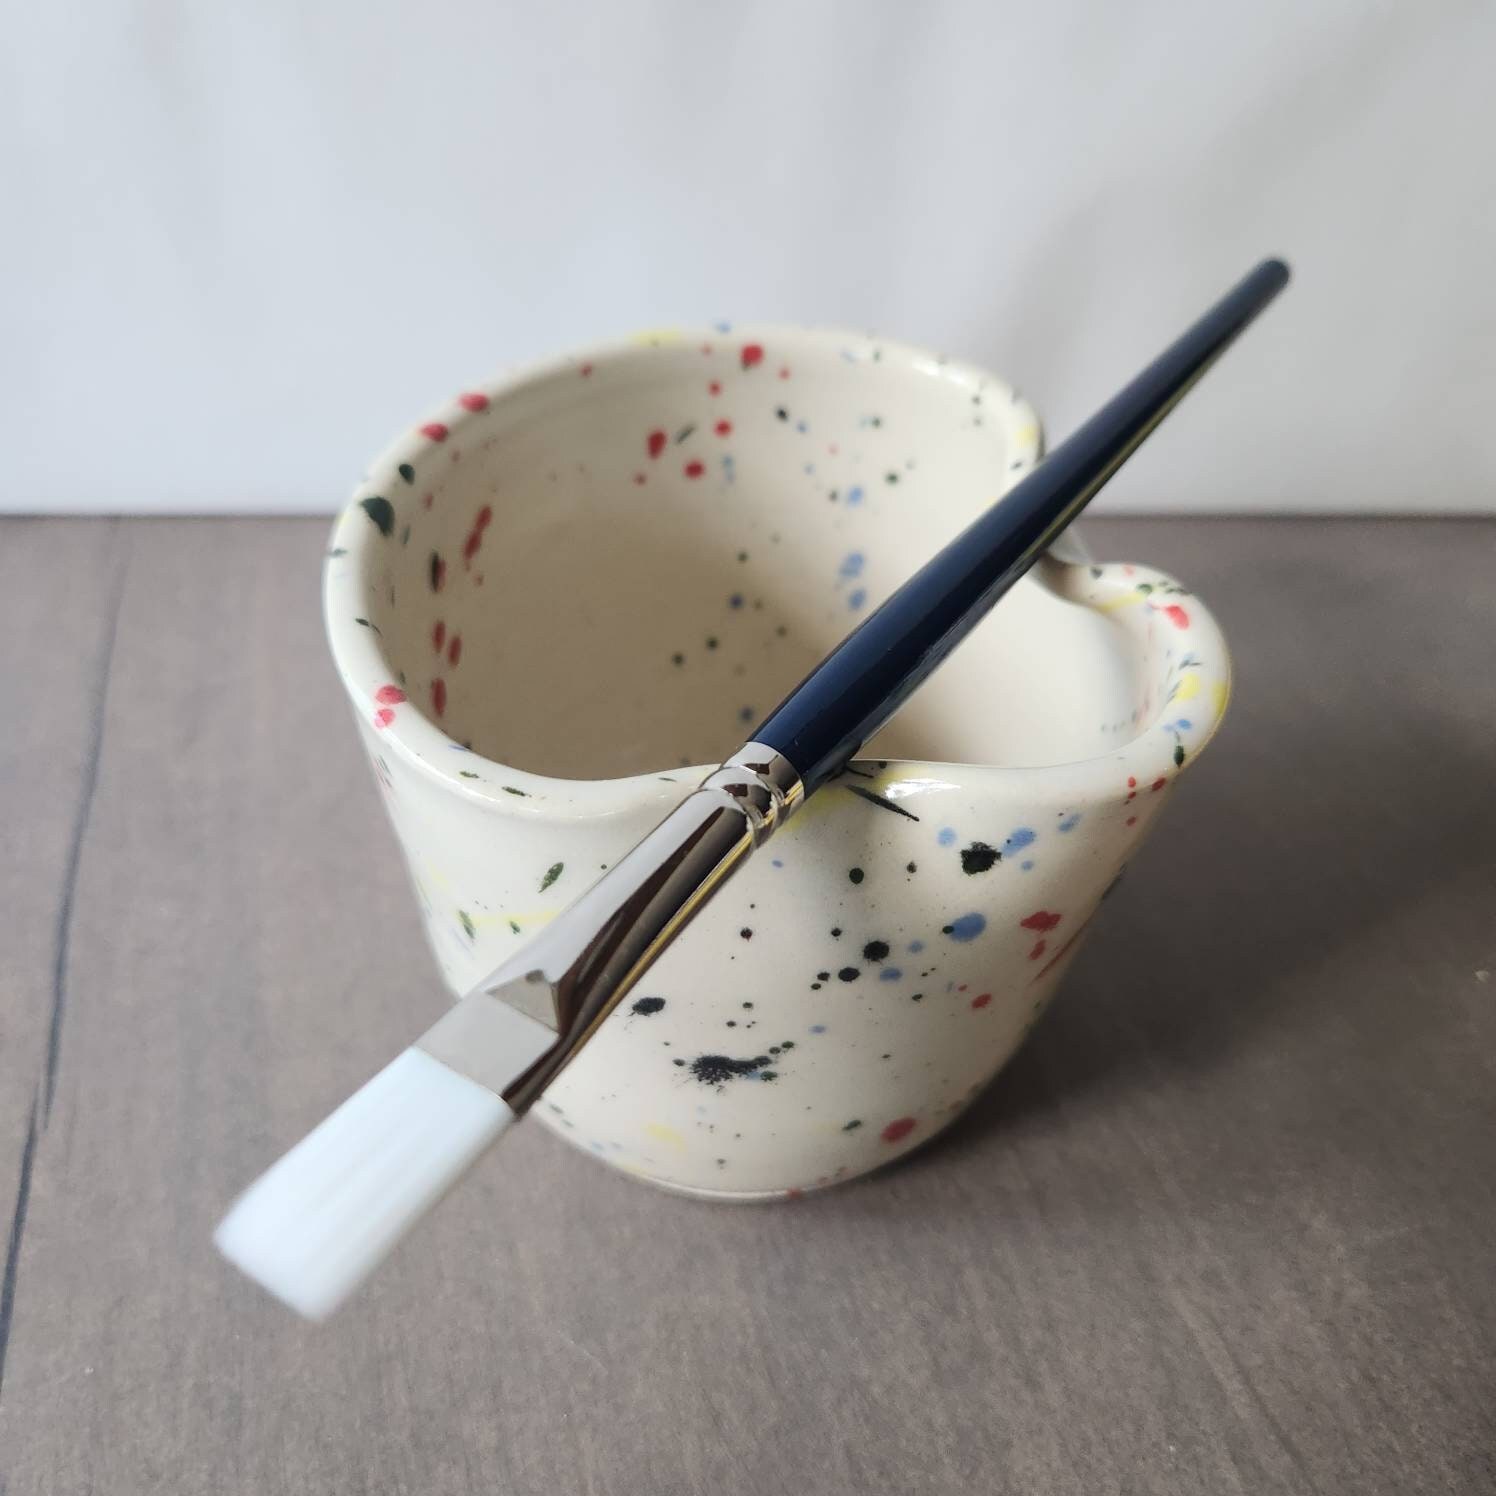 PRE-ORDER Handmade Colorful Pottery Paint Water Cup, Artist Brush Holder  With a Folded Rim for Holding Brush. -  Norway